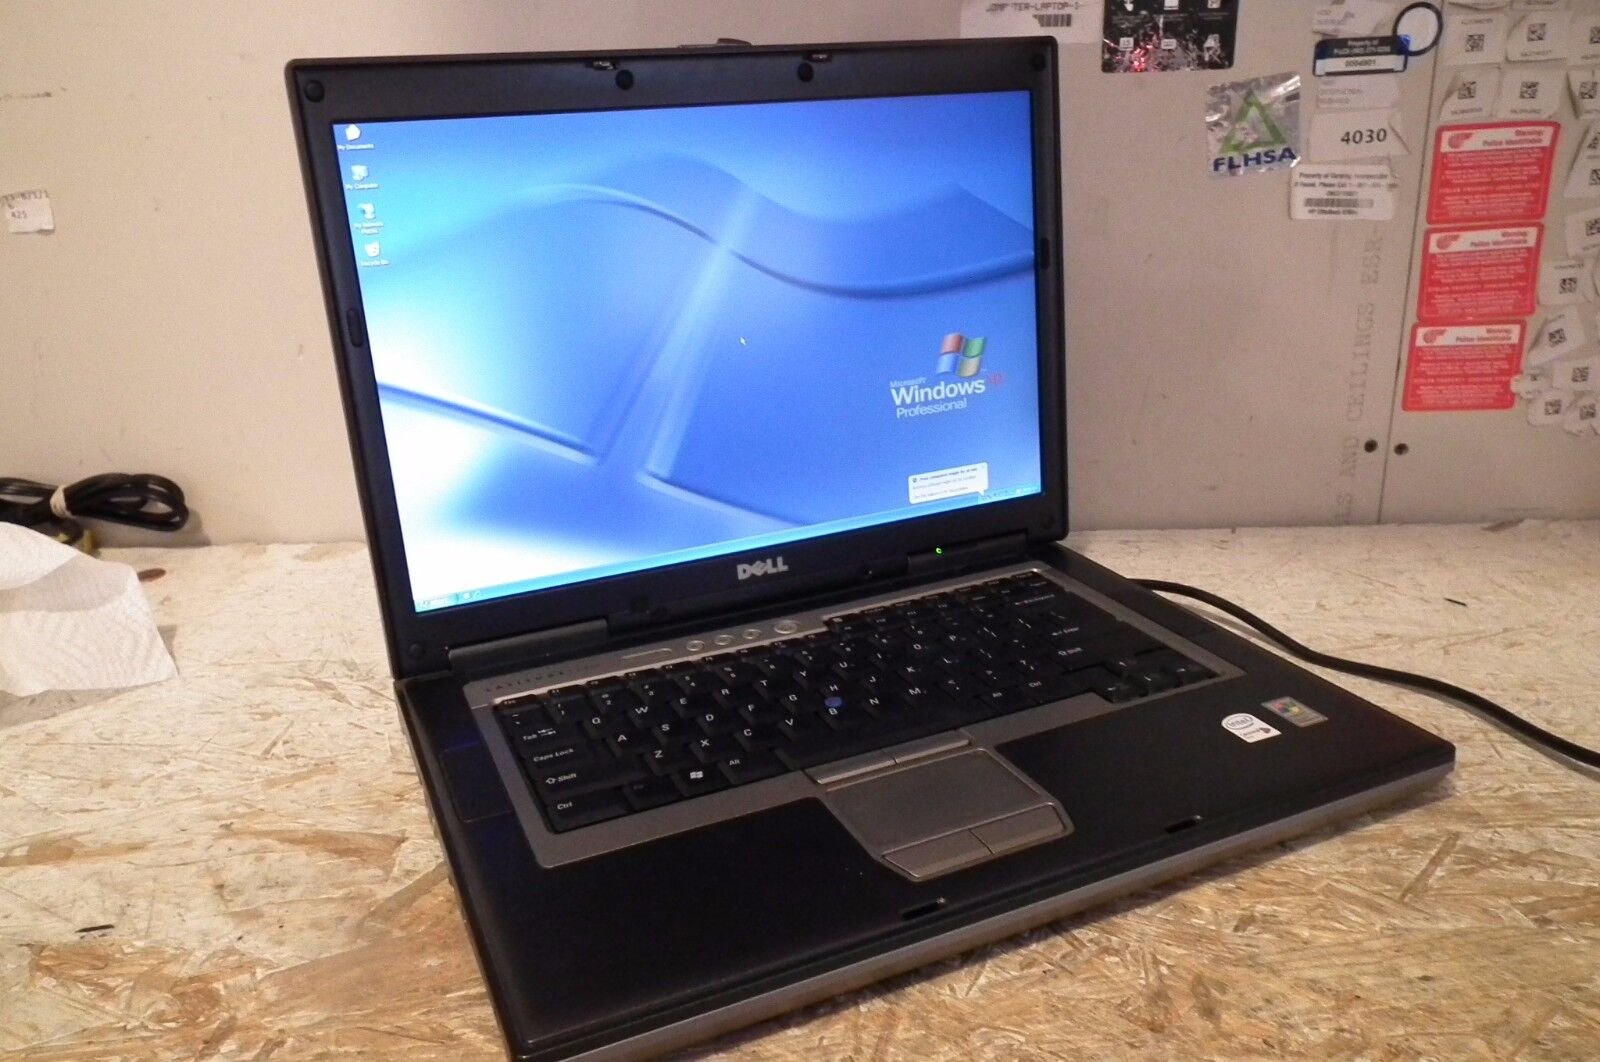 Dell D620 Laptop / 1.66ghz  / 2gb / Windows XP / WIFI / DVD / very fast RS232